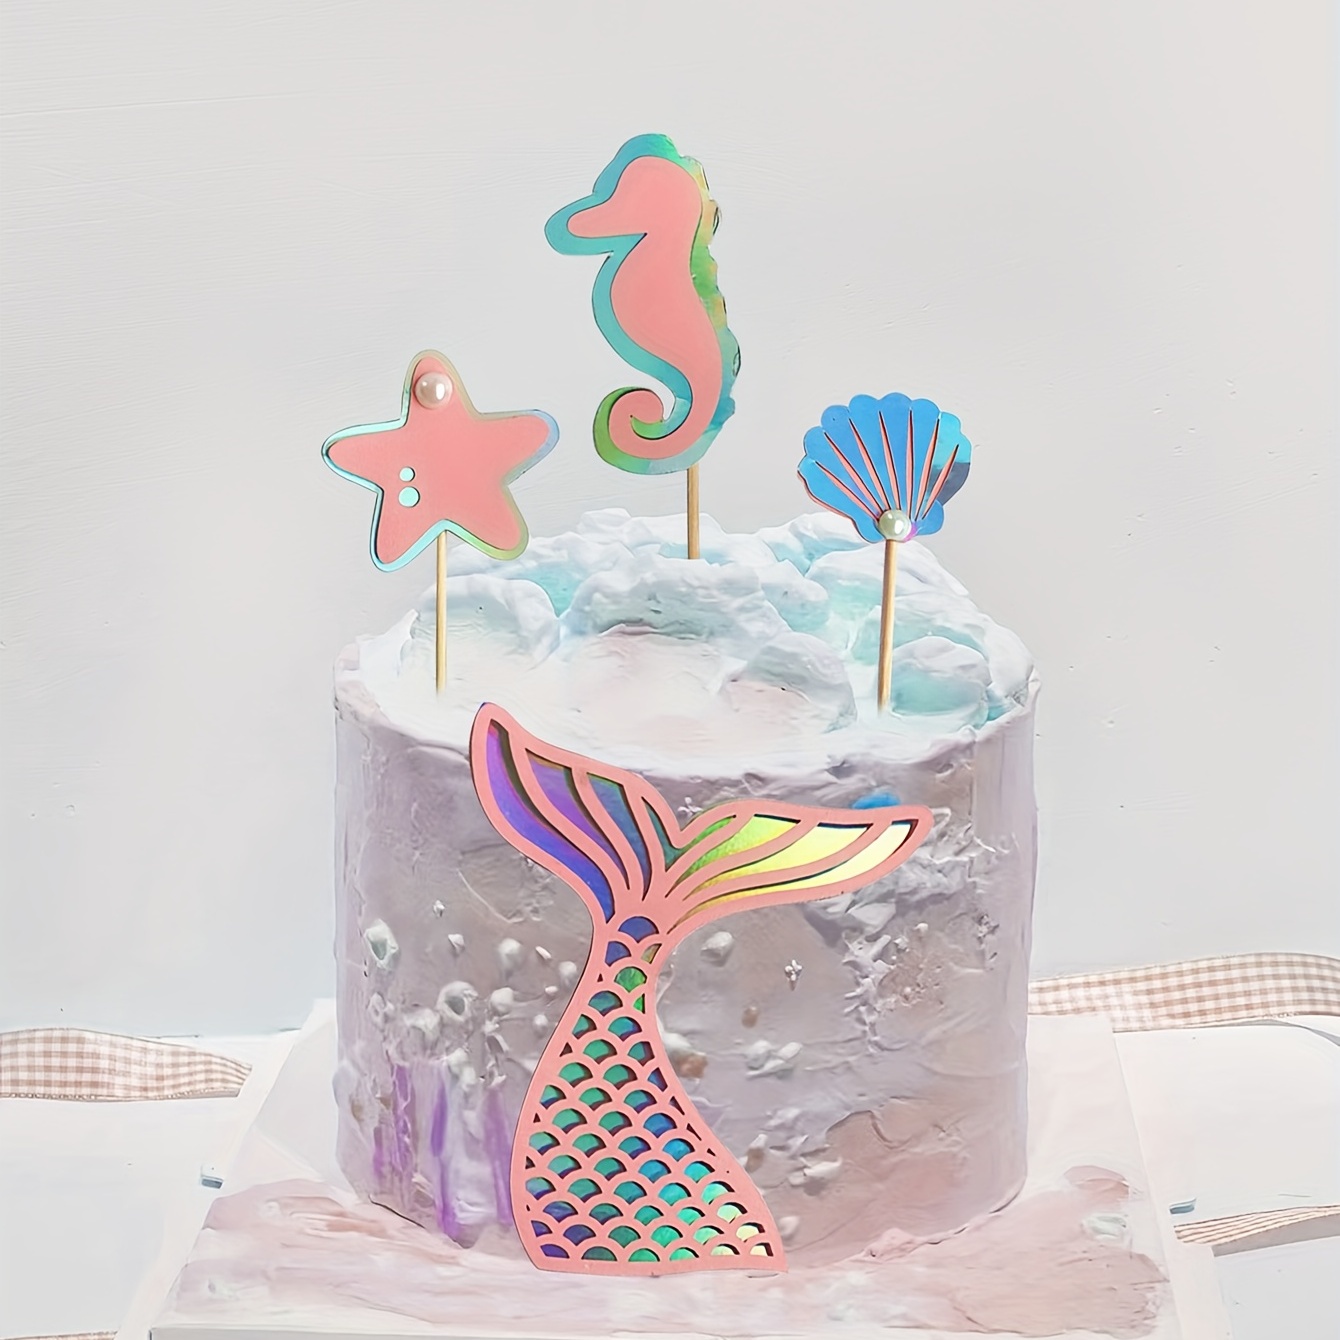 Glitter Mermaid Theme Birthday Cake Topper with Seaweed and Mermaid, Cake  Cupcake Toppers for Girls Mermaid Themed Birthday Cake Party Decorations 